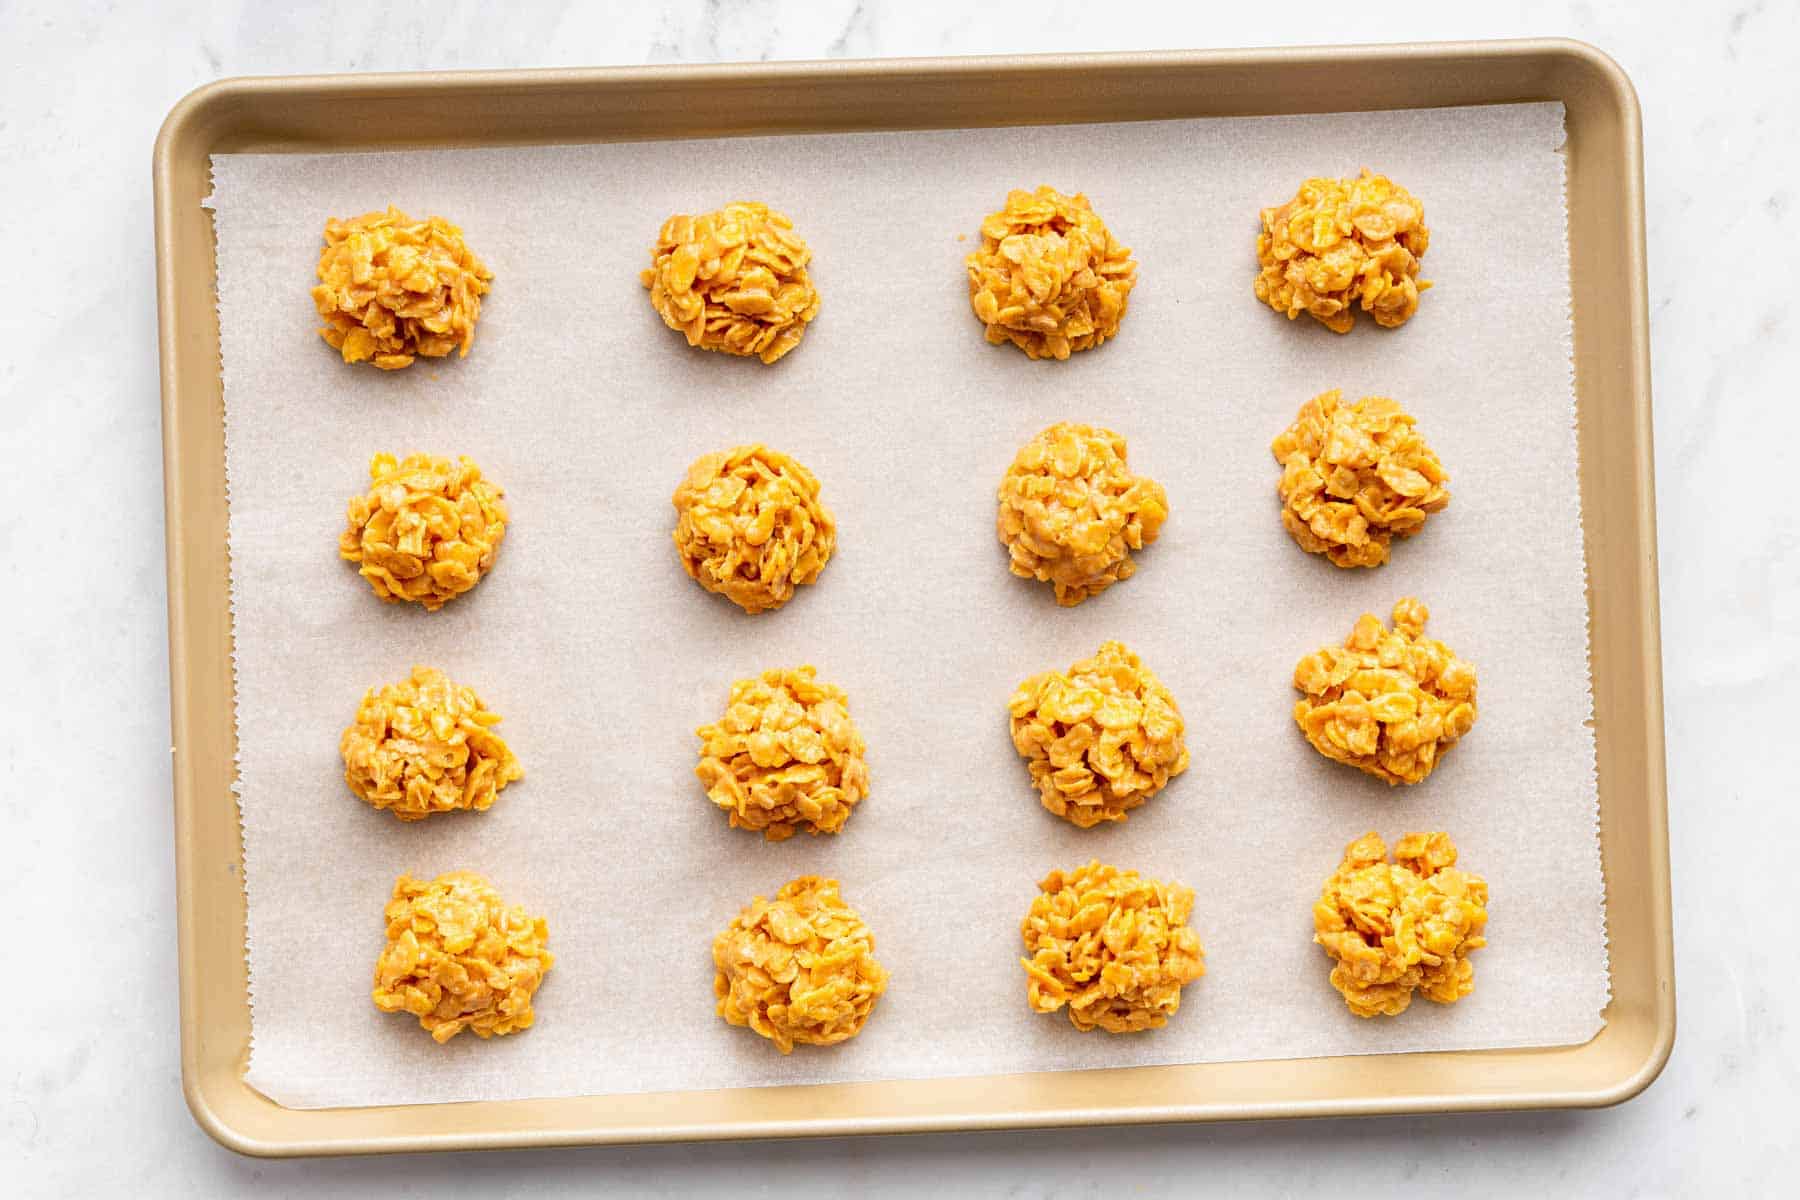 Sheet pan with 16 cornflake cookies cooling on it.